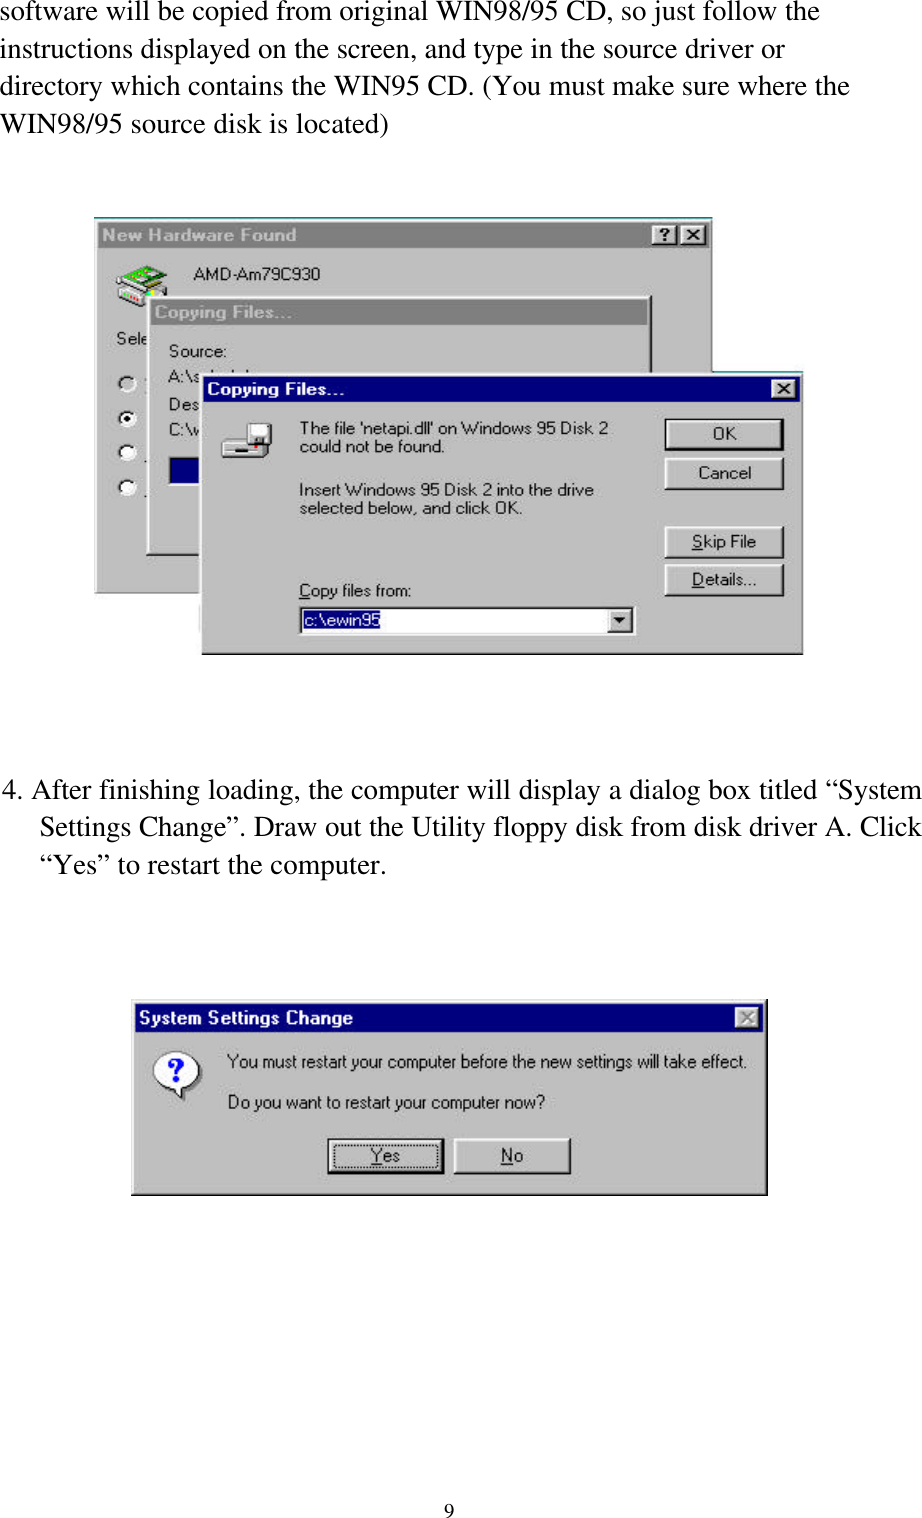 9   software will be copied from original WIN98/95 CD, so just follow the      instructions displayed on the screen, and type in the source driver or      directory which contains the WIN95 CD. (You must make sure where the   WIN98/95 source disk is located)4. After finishing loading, the computer will display a dialog box titled “SystemSettings Change”. Draw out the Utility floppy disk from disk driver A. Click“Yes” to restart the computer.